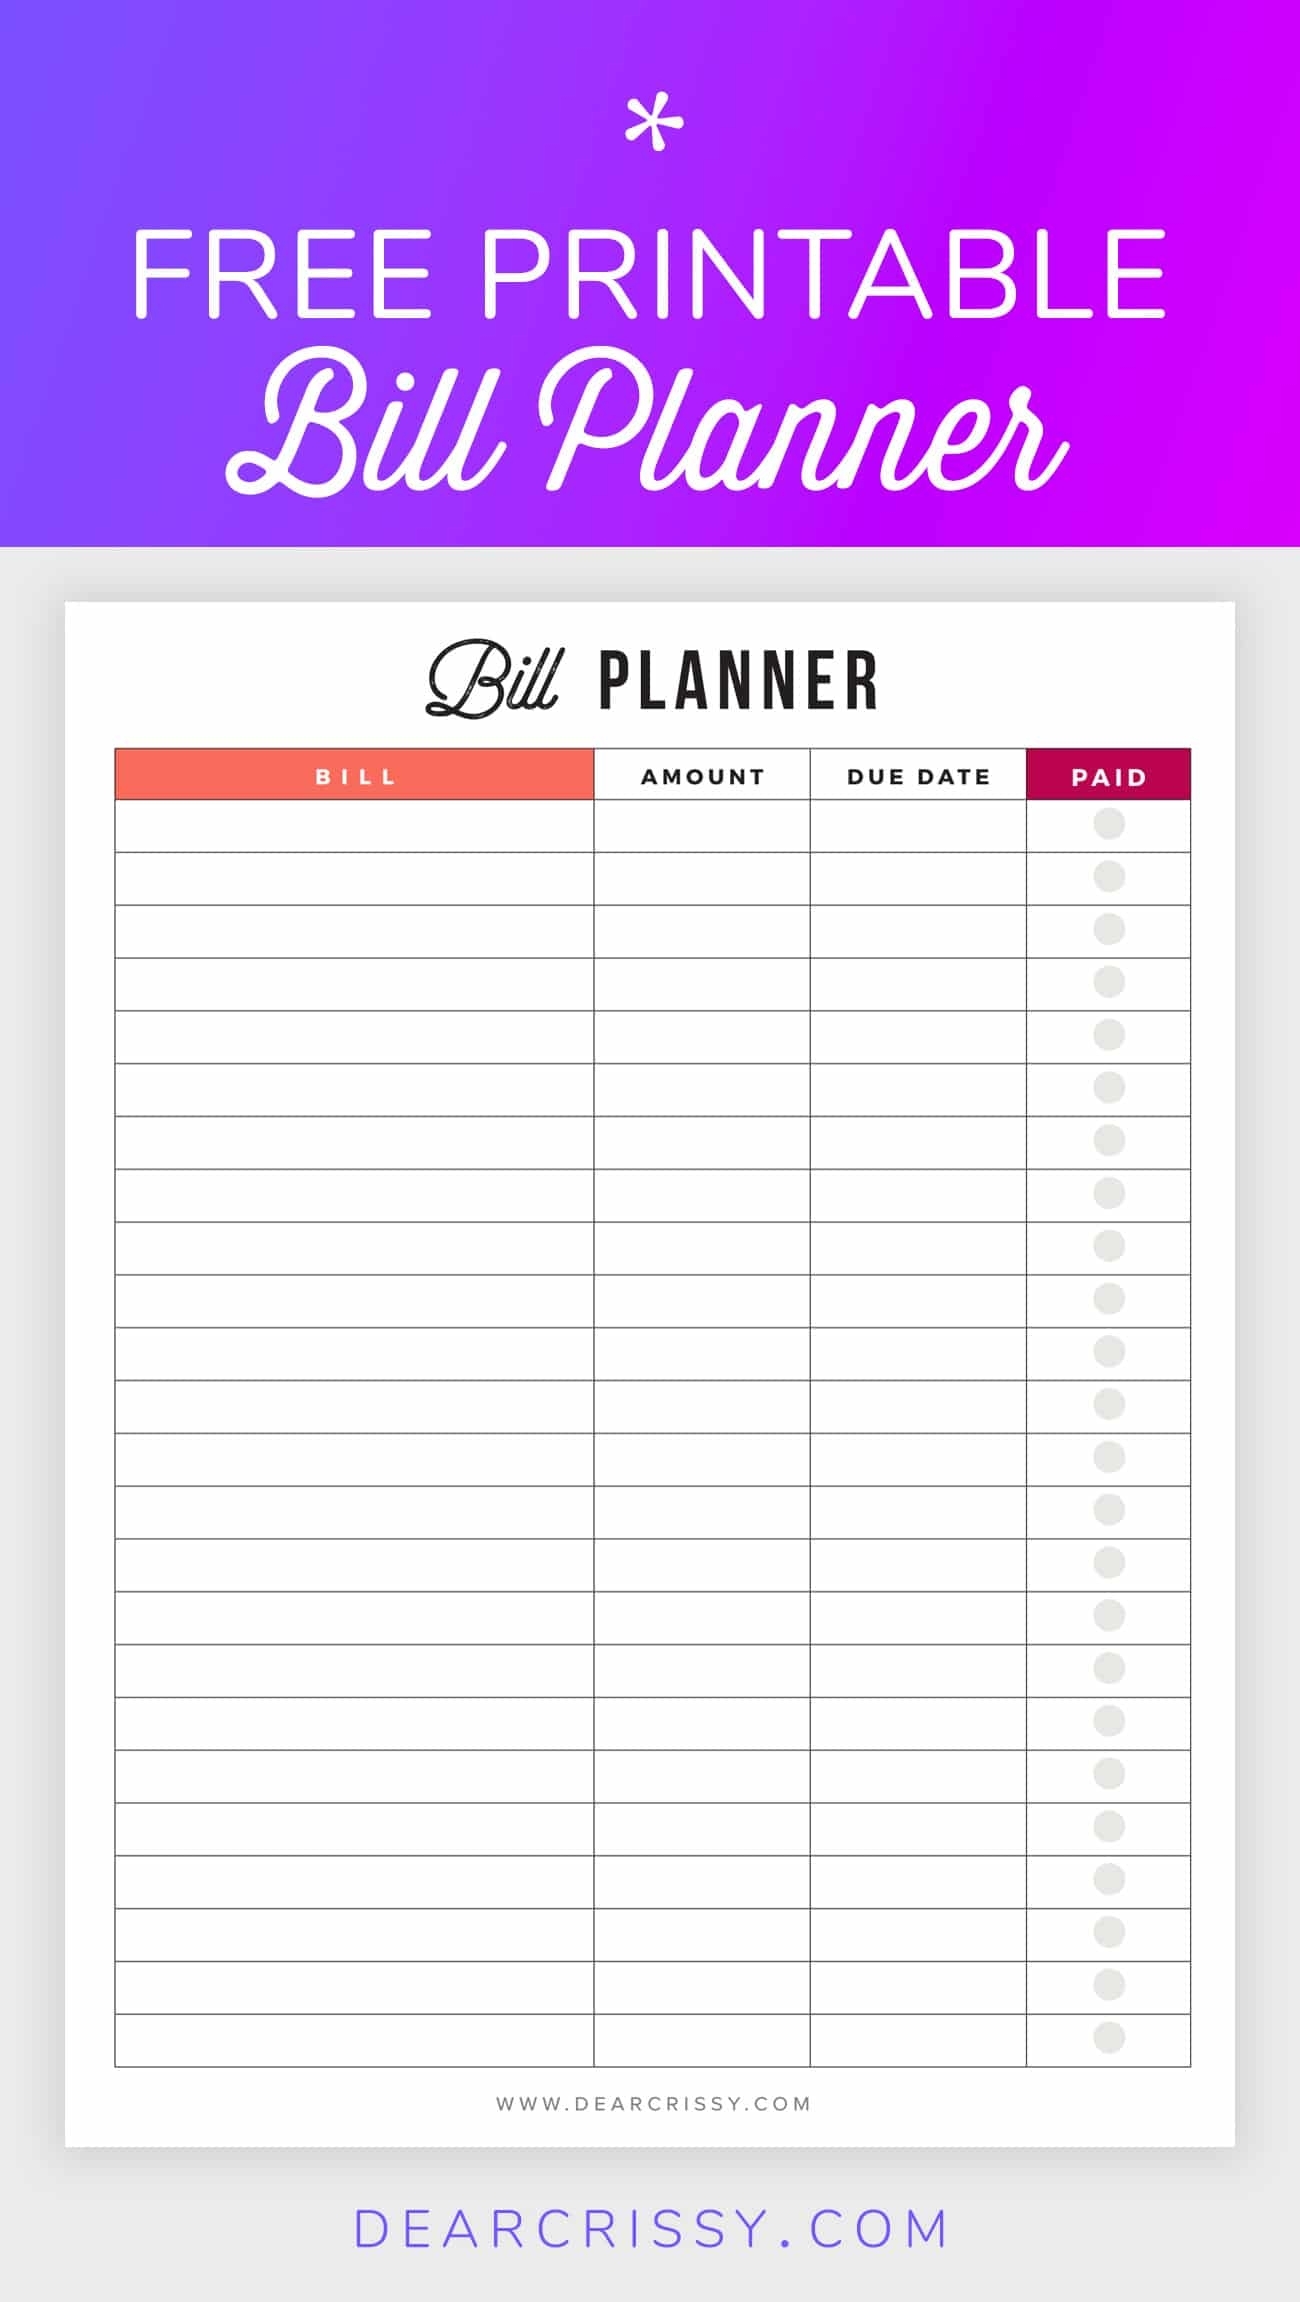 Bill Planner Printable - Pay Down Your Bills This Year! pertaining to Free Printable Monthly Bill Payment